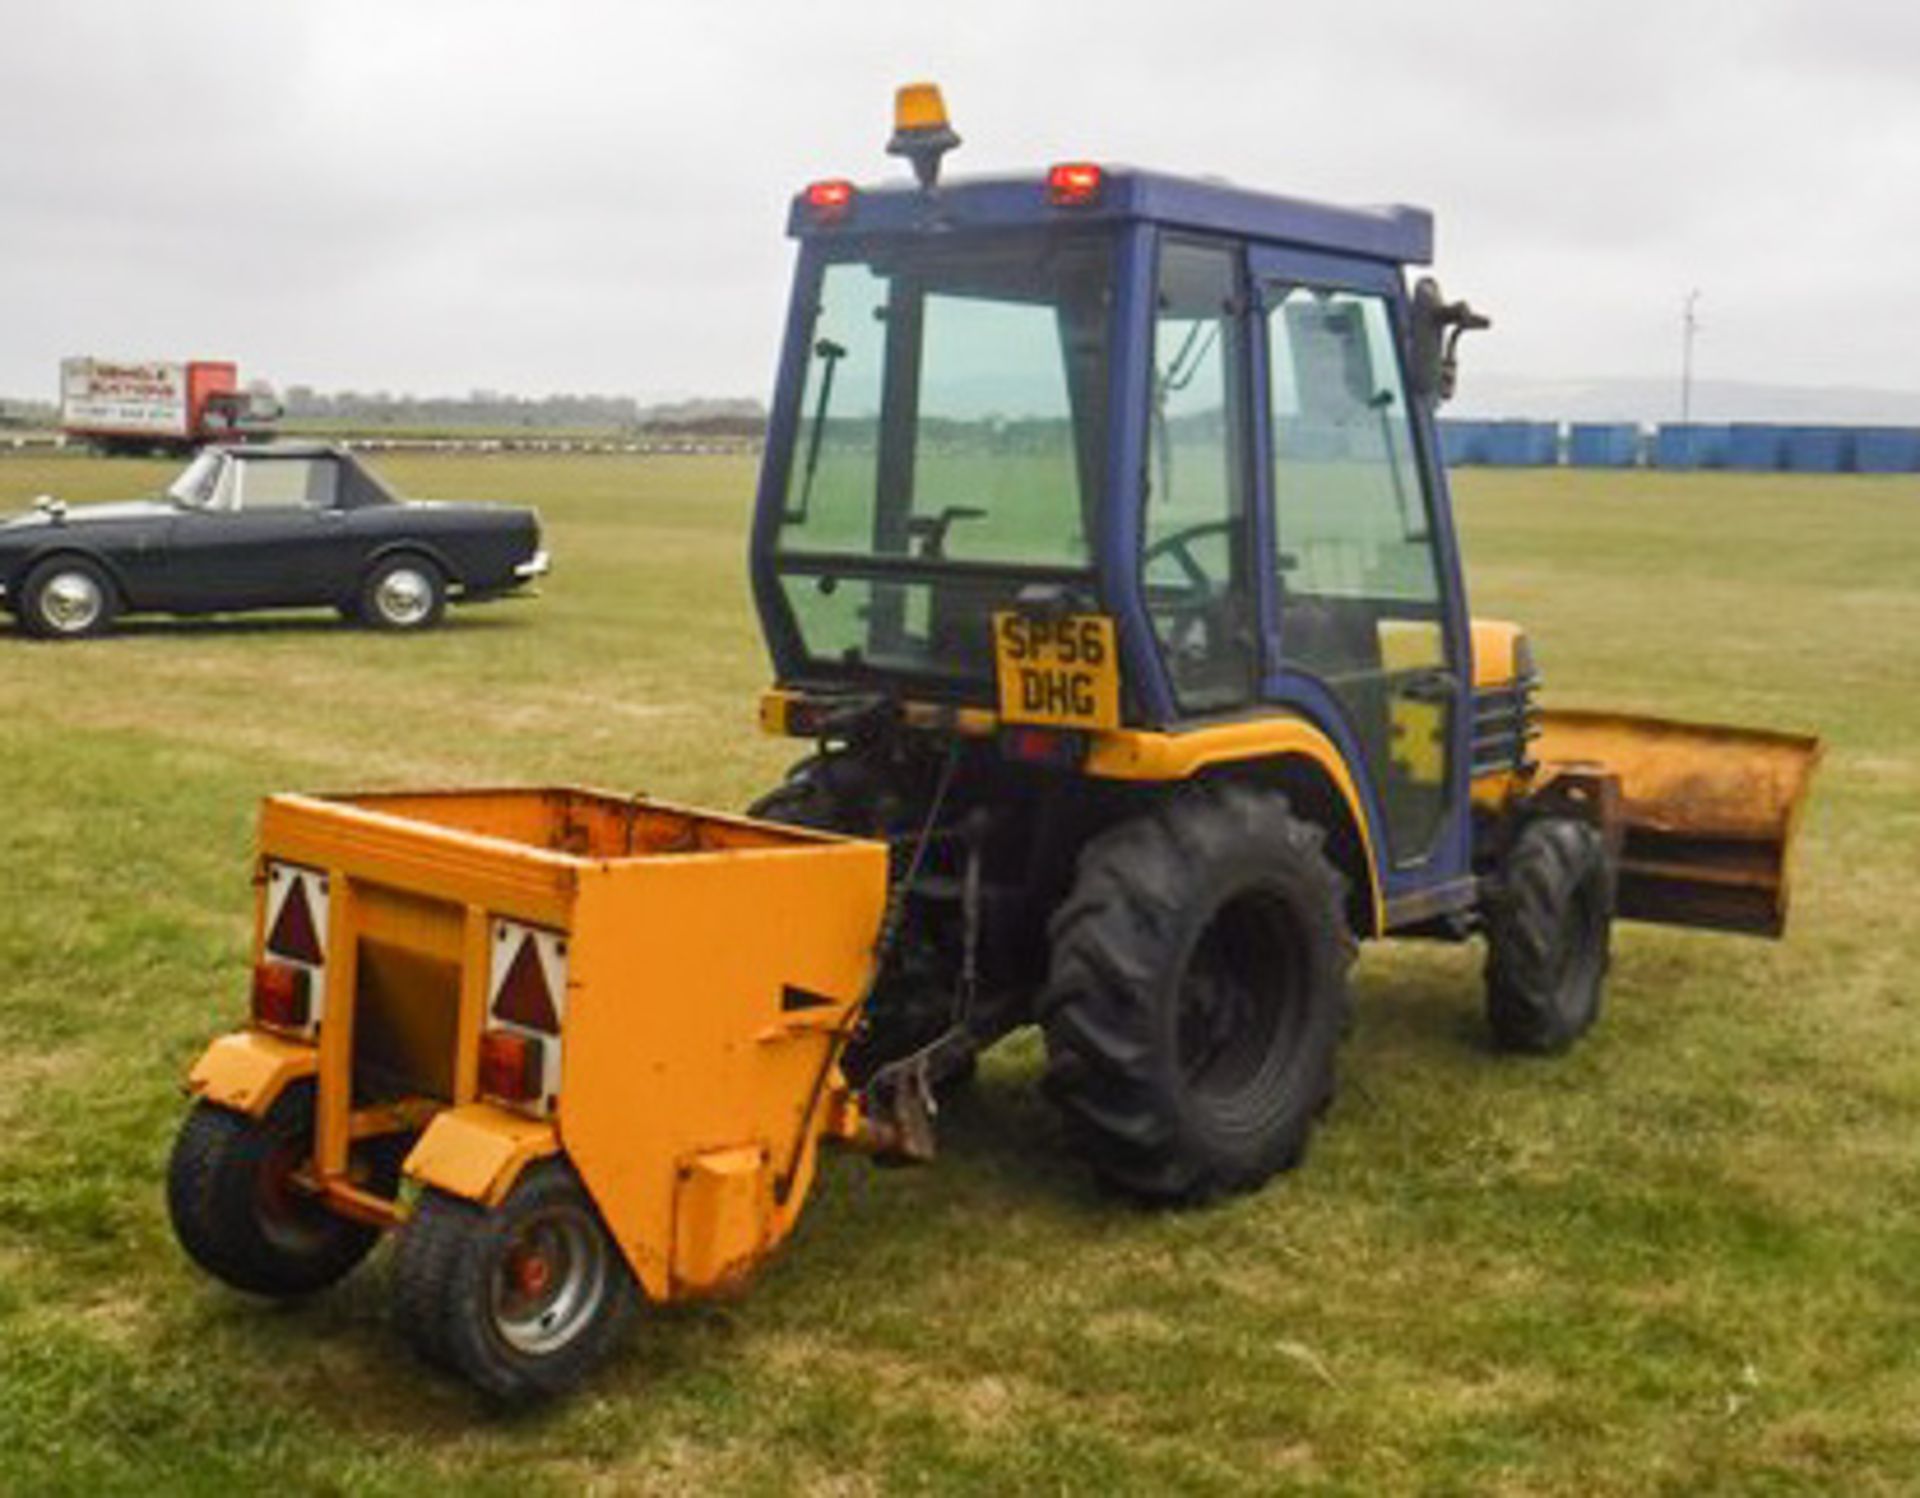 2006 KUBOTA B2400, S/N D31801, REG - SP56DHG, 715HRS (NOT VERIFIED), COMPACT TRACTOR WITH SNOW PLOUG - Image 5 of 17